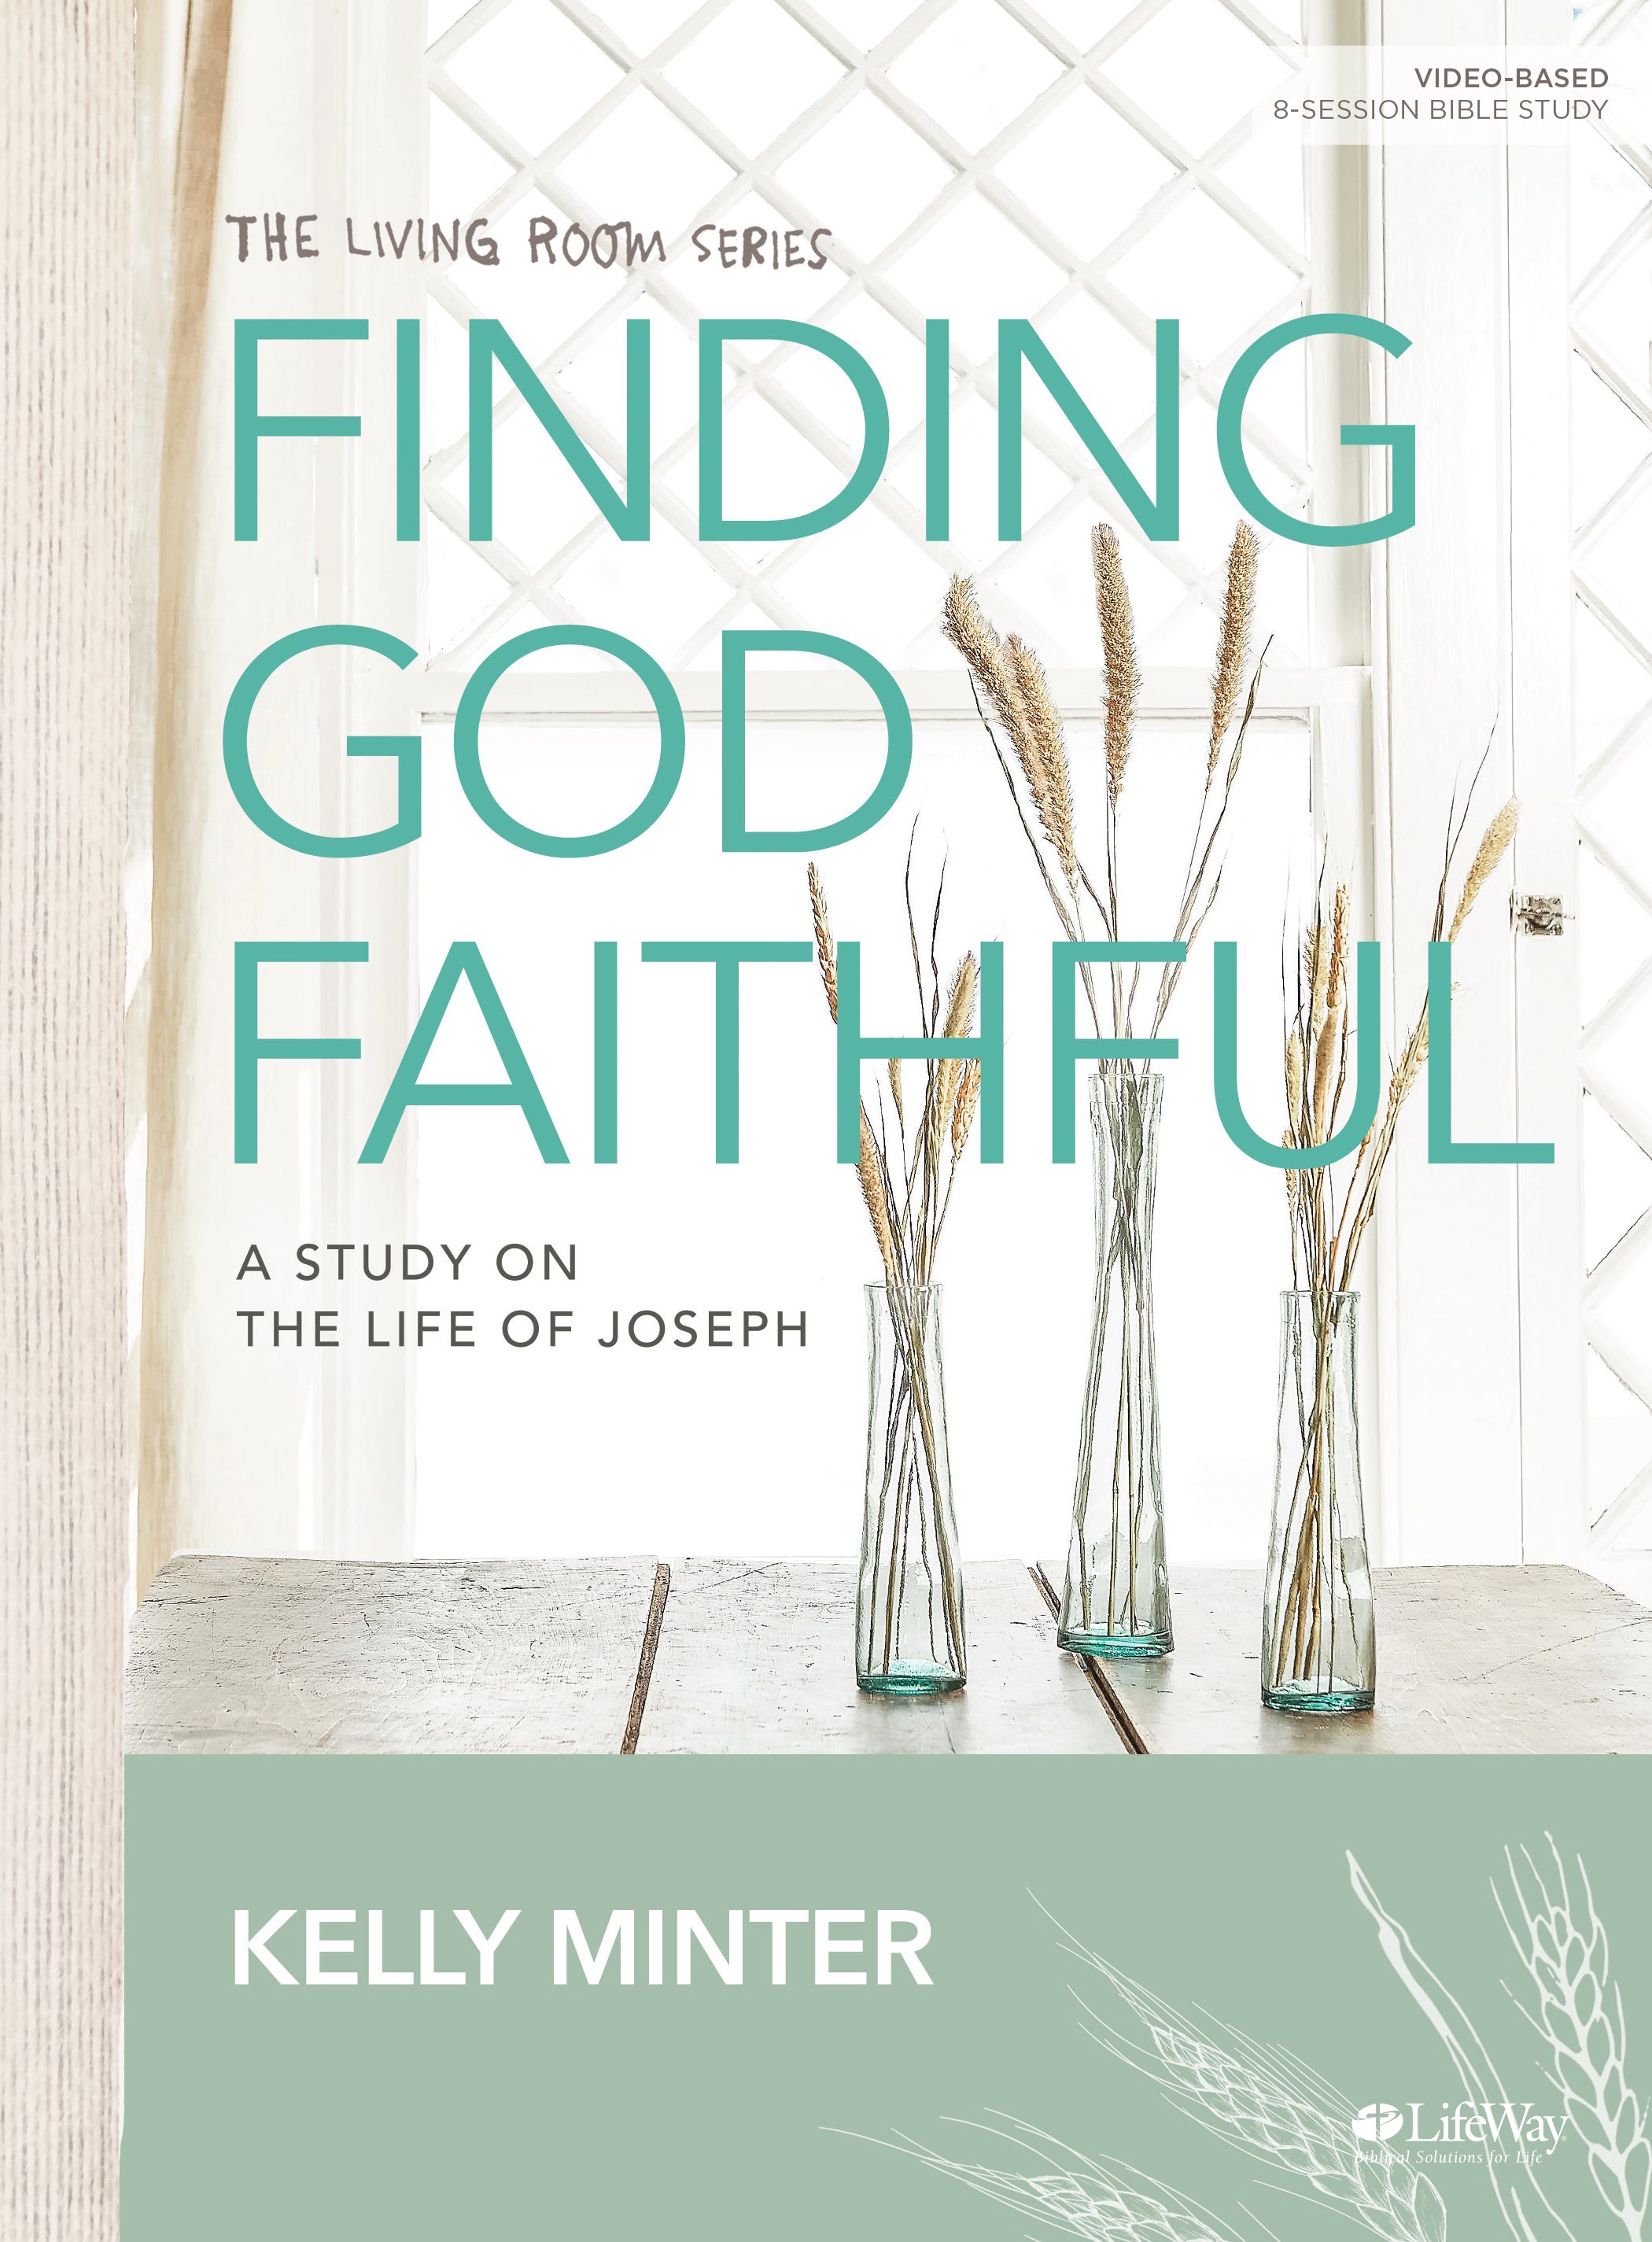 Image of Finding God Faithful - Bible Study Book other